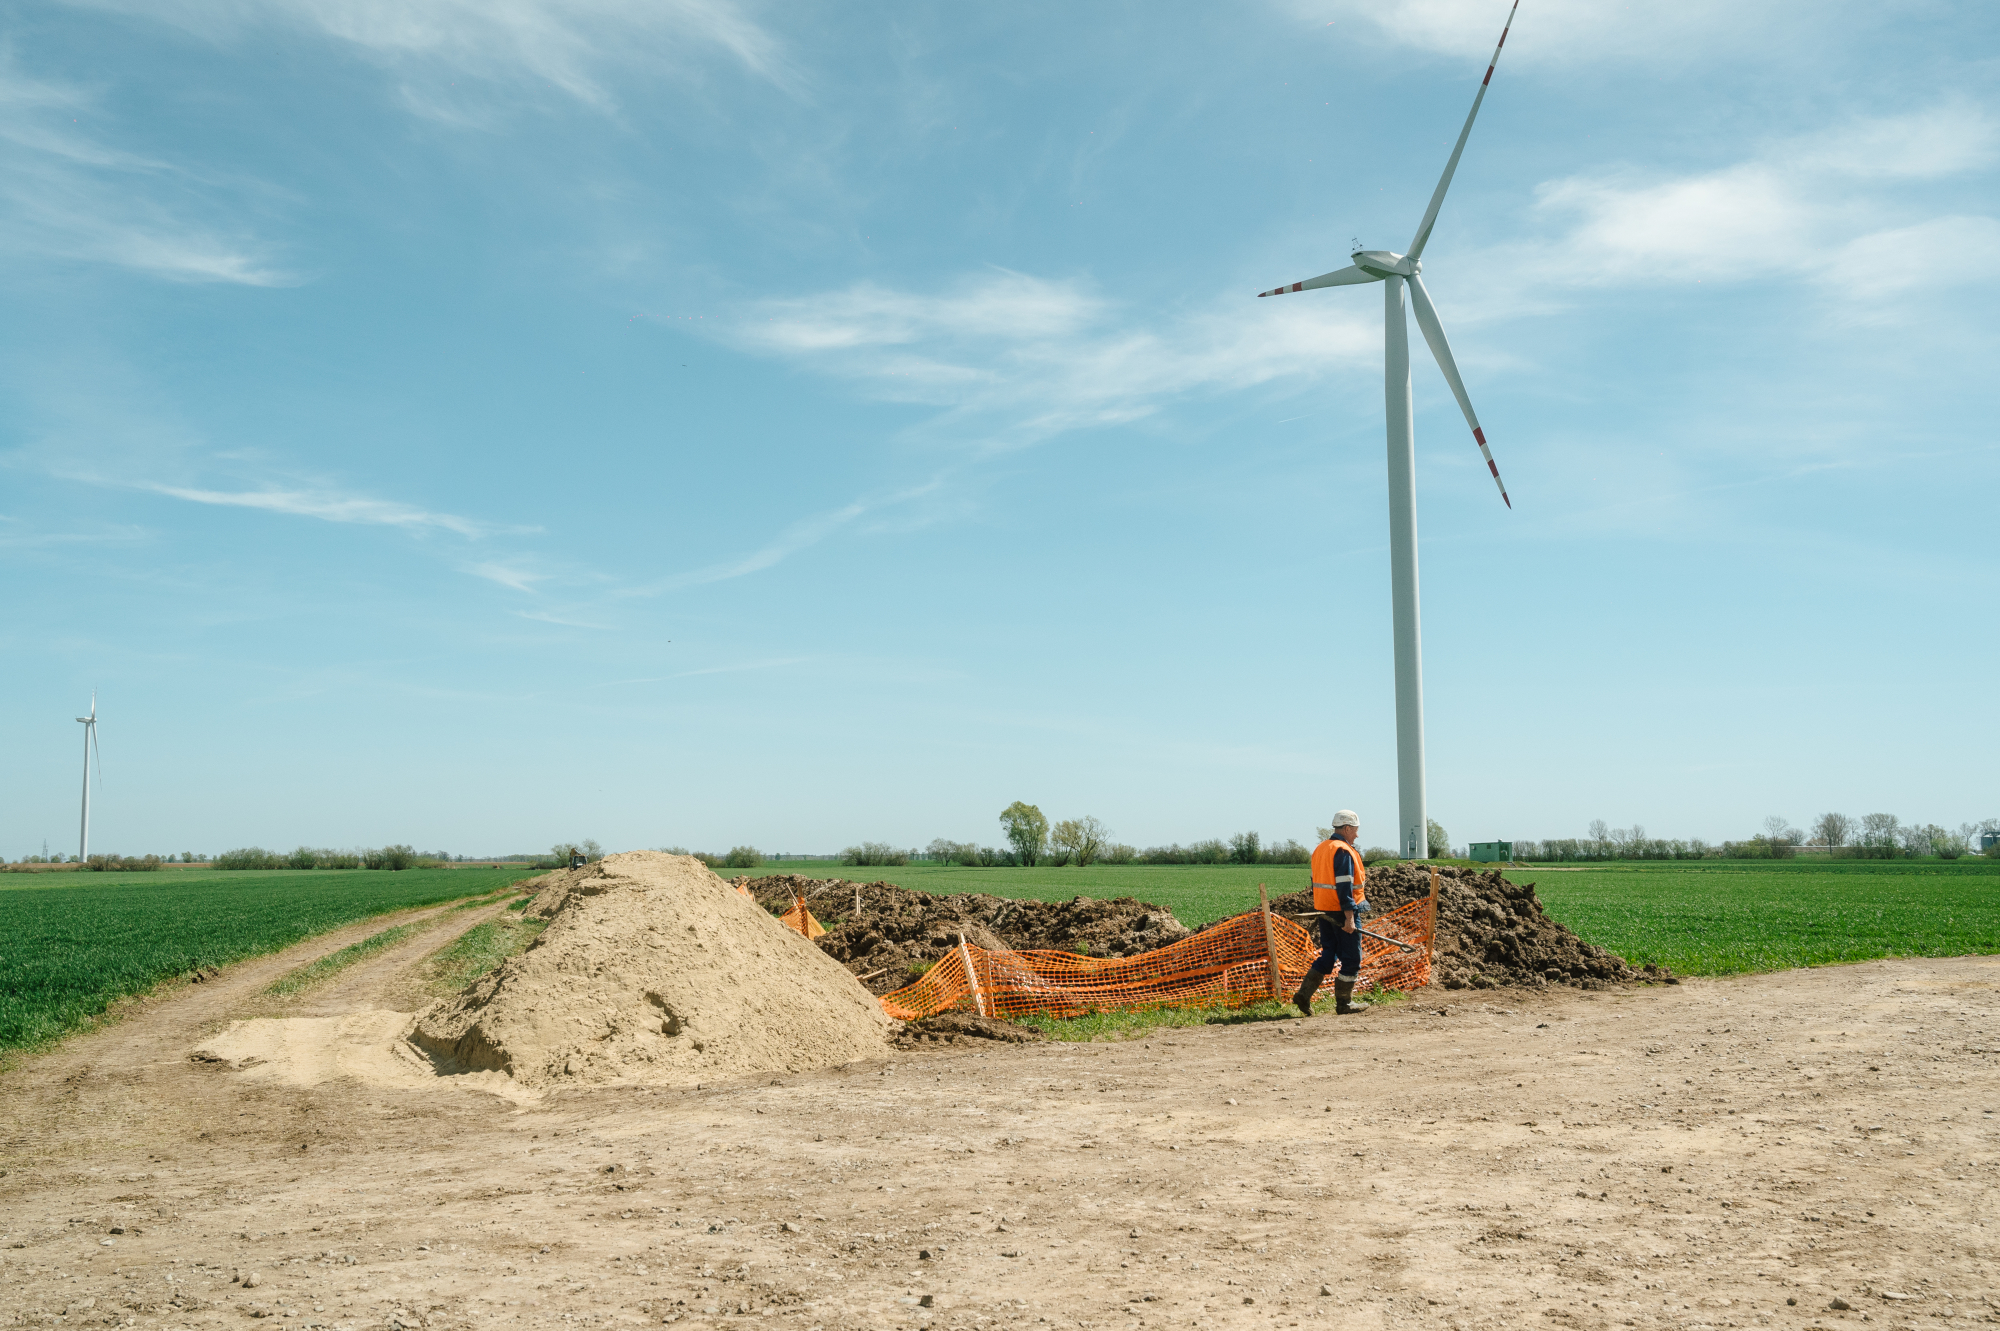 Construction of the Lech Nowy Staw wind farm has commenced